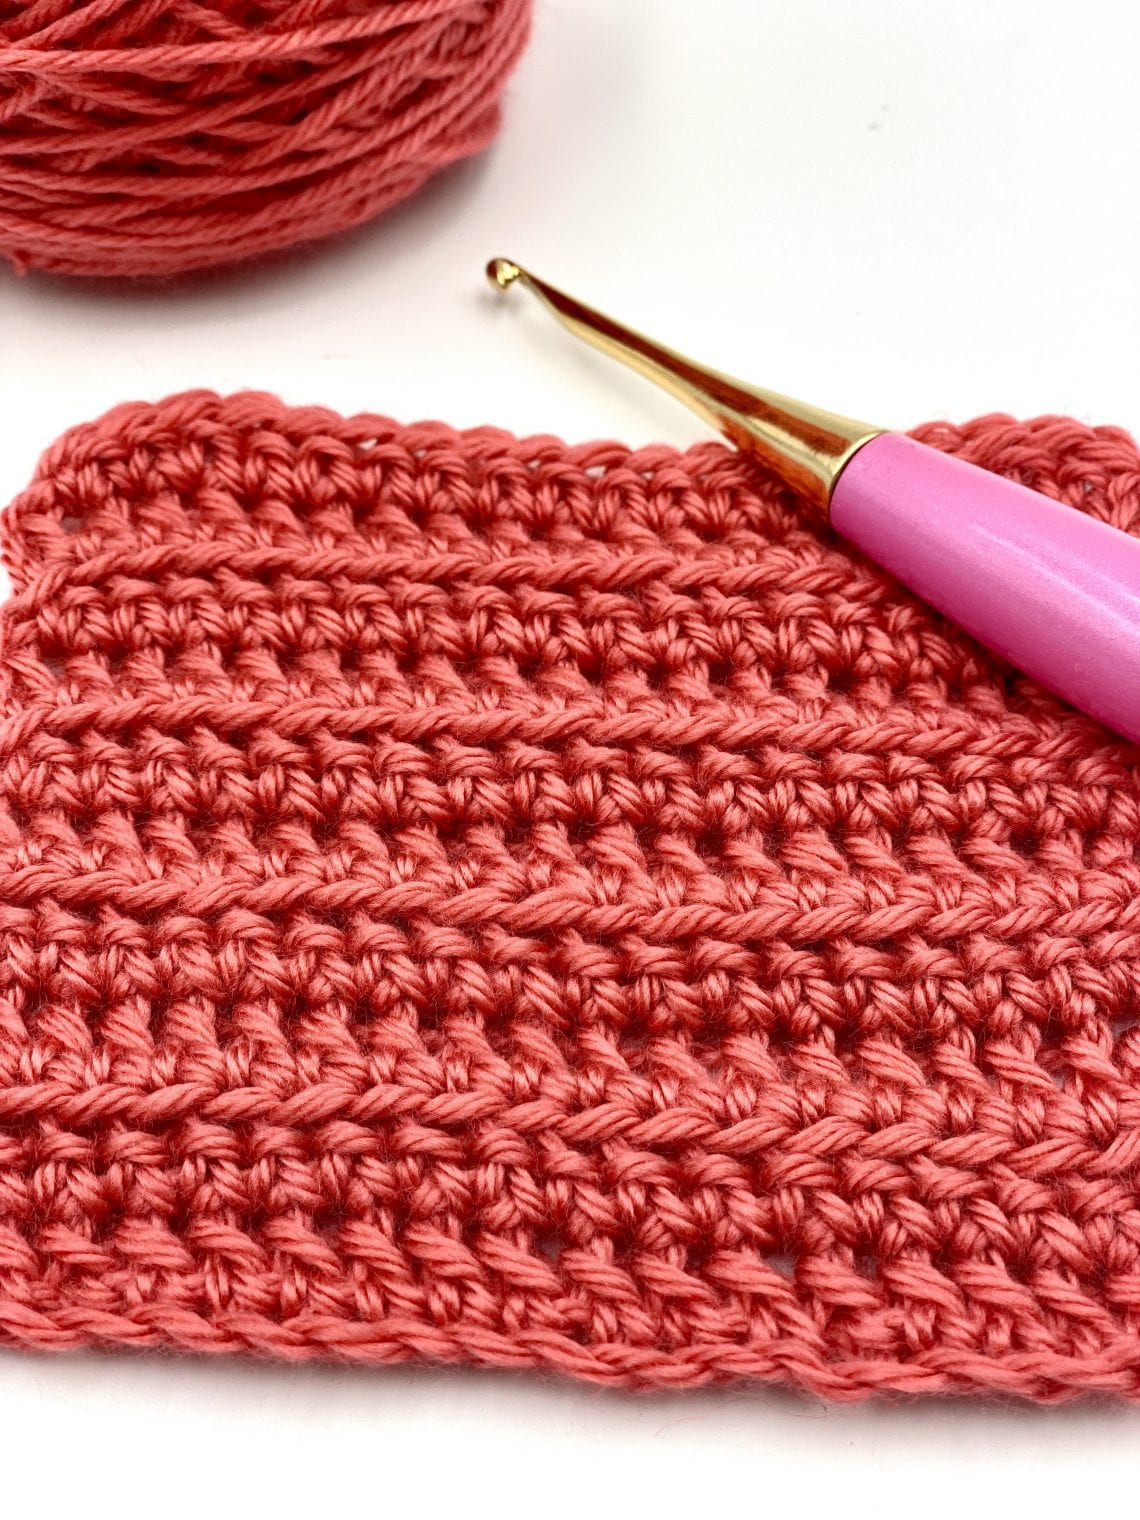 From Beginner to Pro: 50+ Crochet Stitches to Enhance Your Skills! - love.  life. yarn.